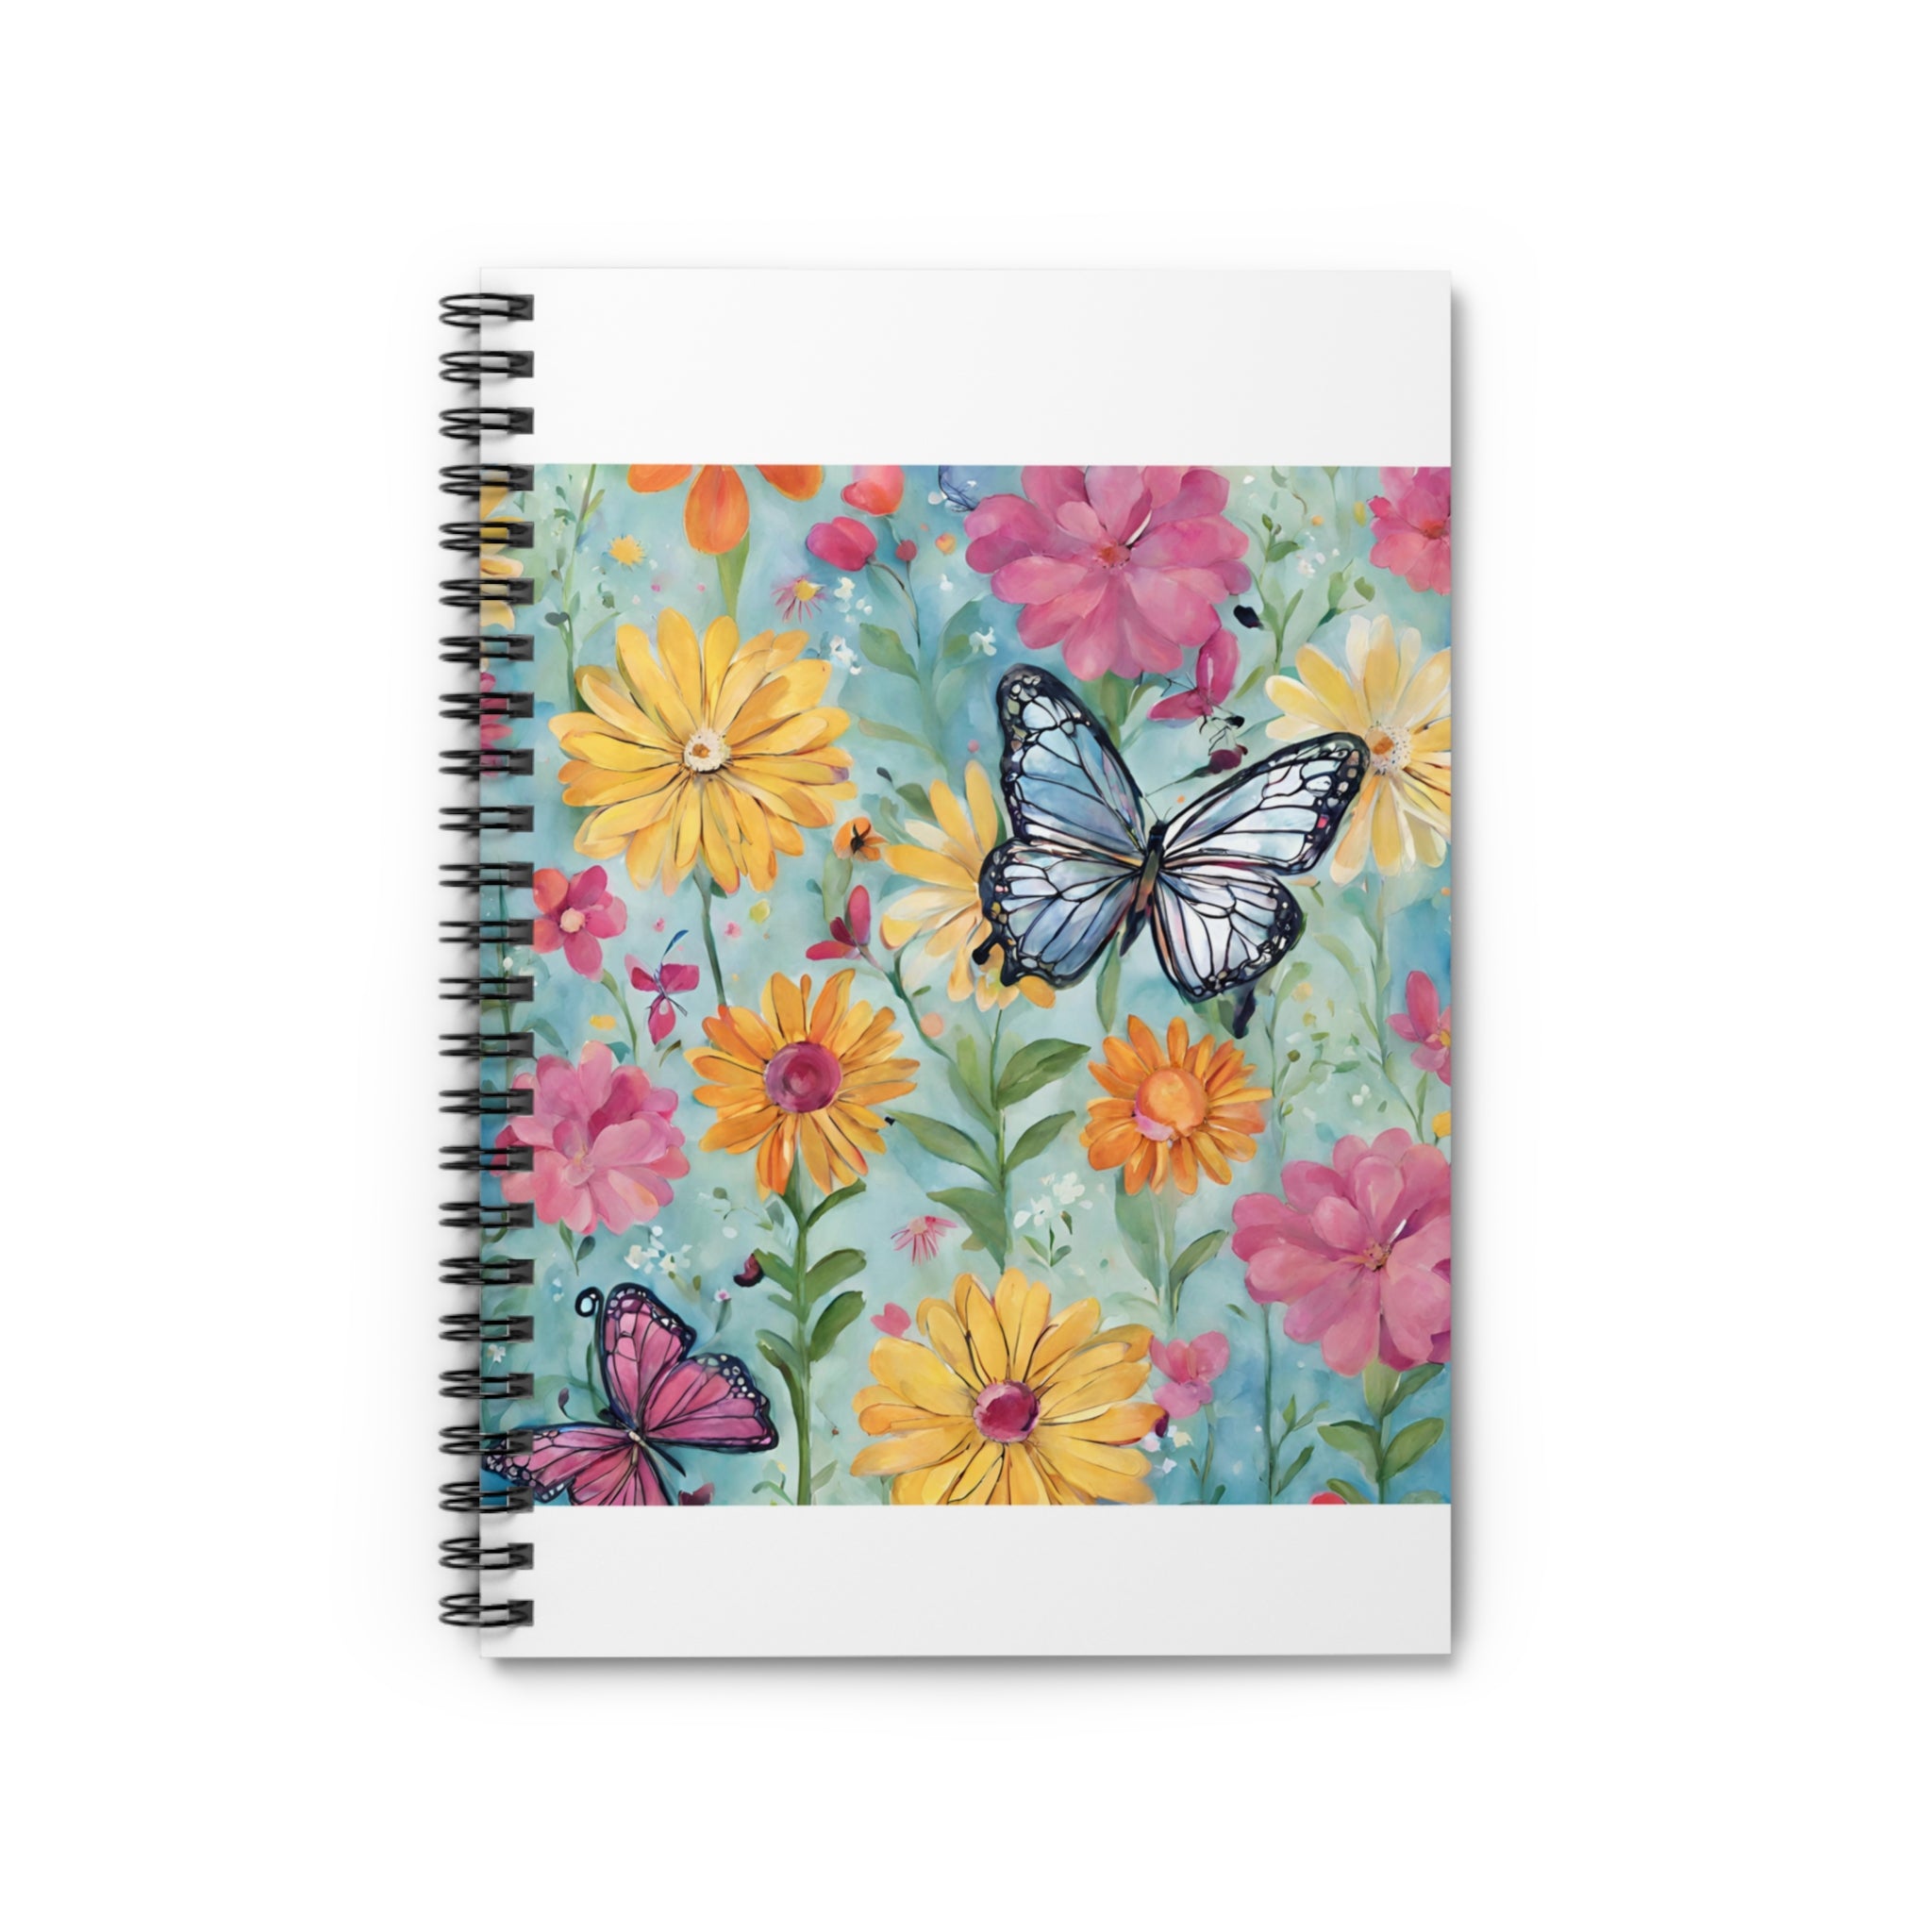 Butterfly Spiral Notebook - Ruled Line